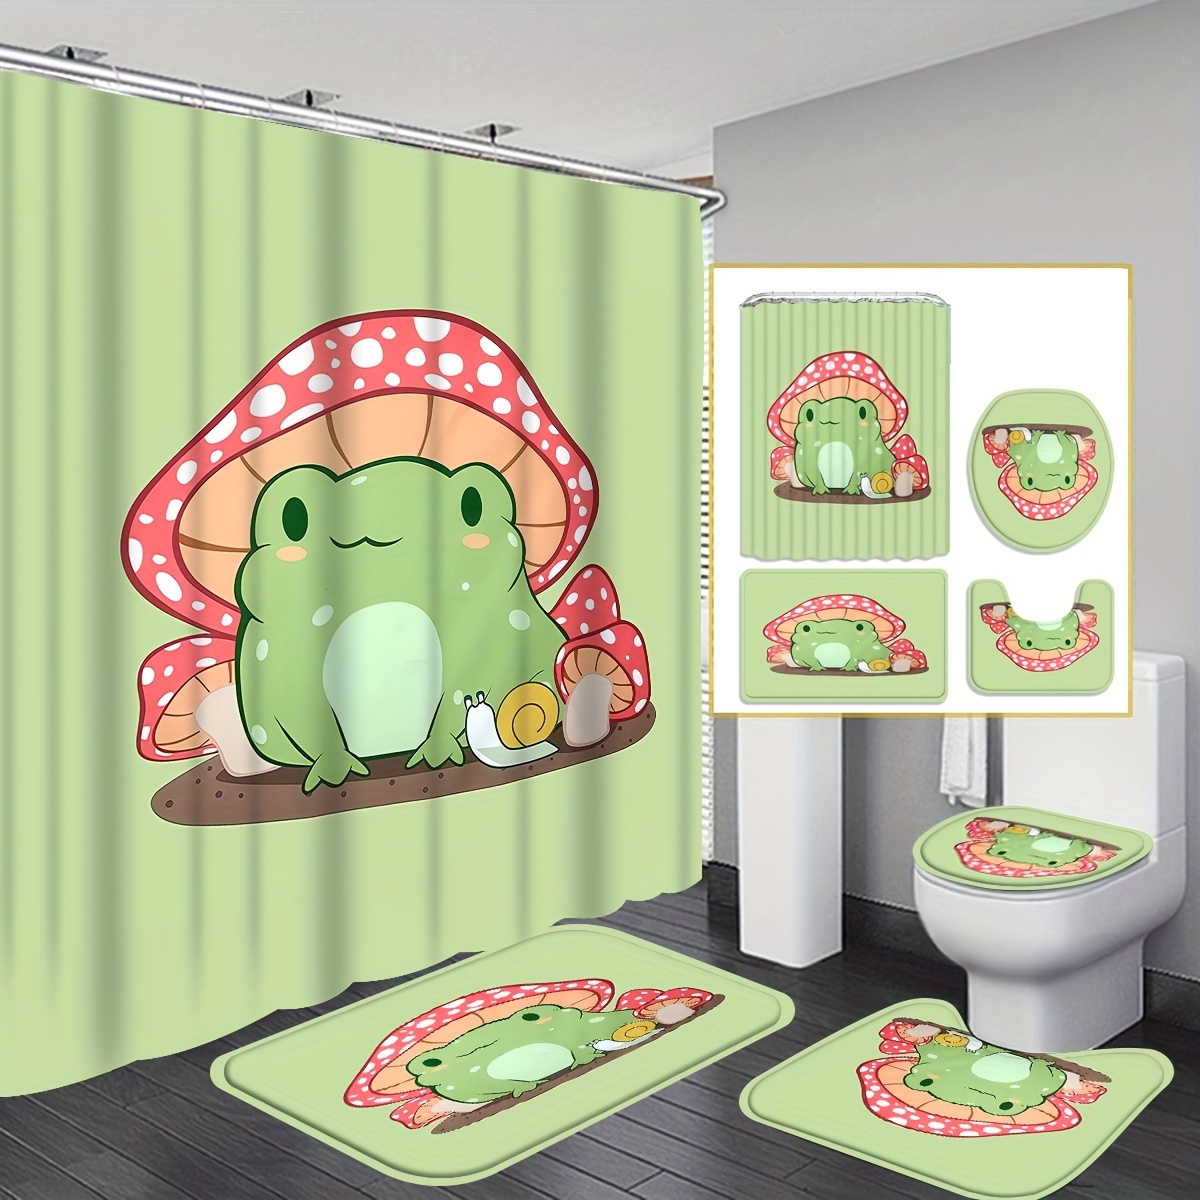 Frog and Mushroom Graphic Decorative Shower Curtain - Whimsical Bathroom  Decor Combination - Bluefink